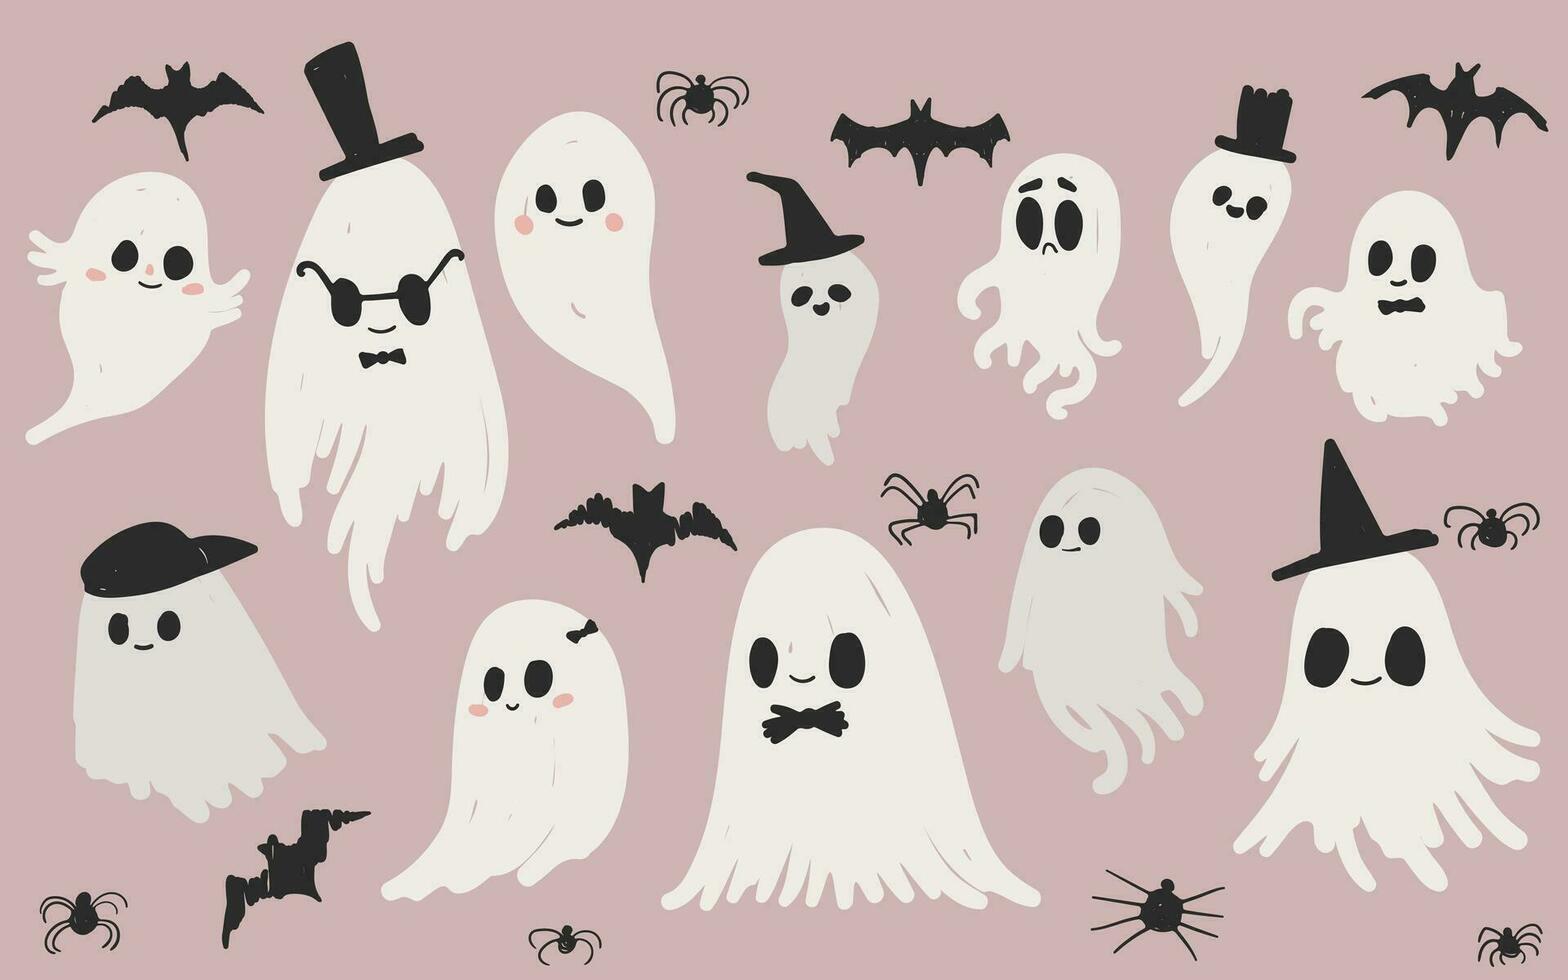 A collection of cute, hand drawn ghosts for Halloween, vector cartoon illustration. For party invitations, prints, posters. The ghosts, drawn in a child friendly style. Not AI generated.